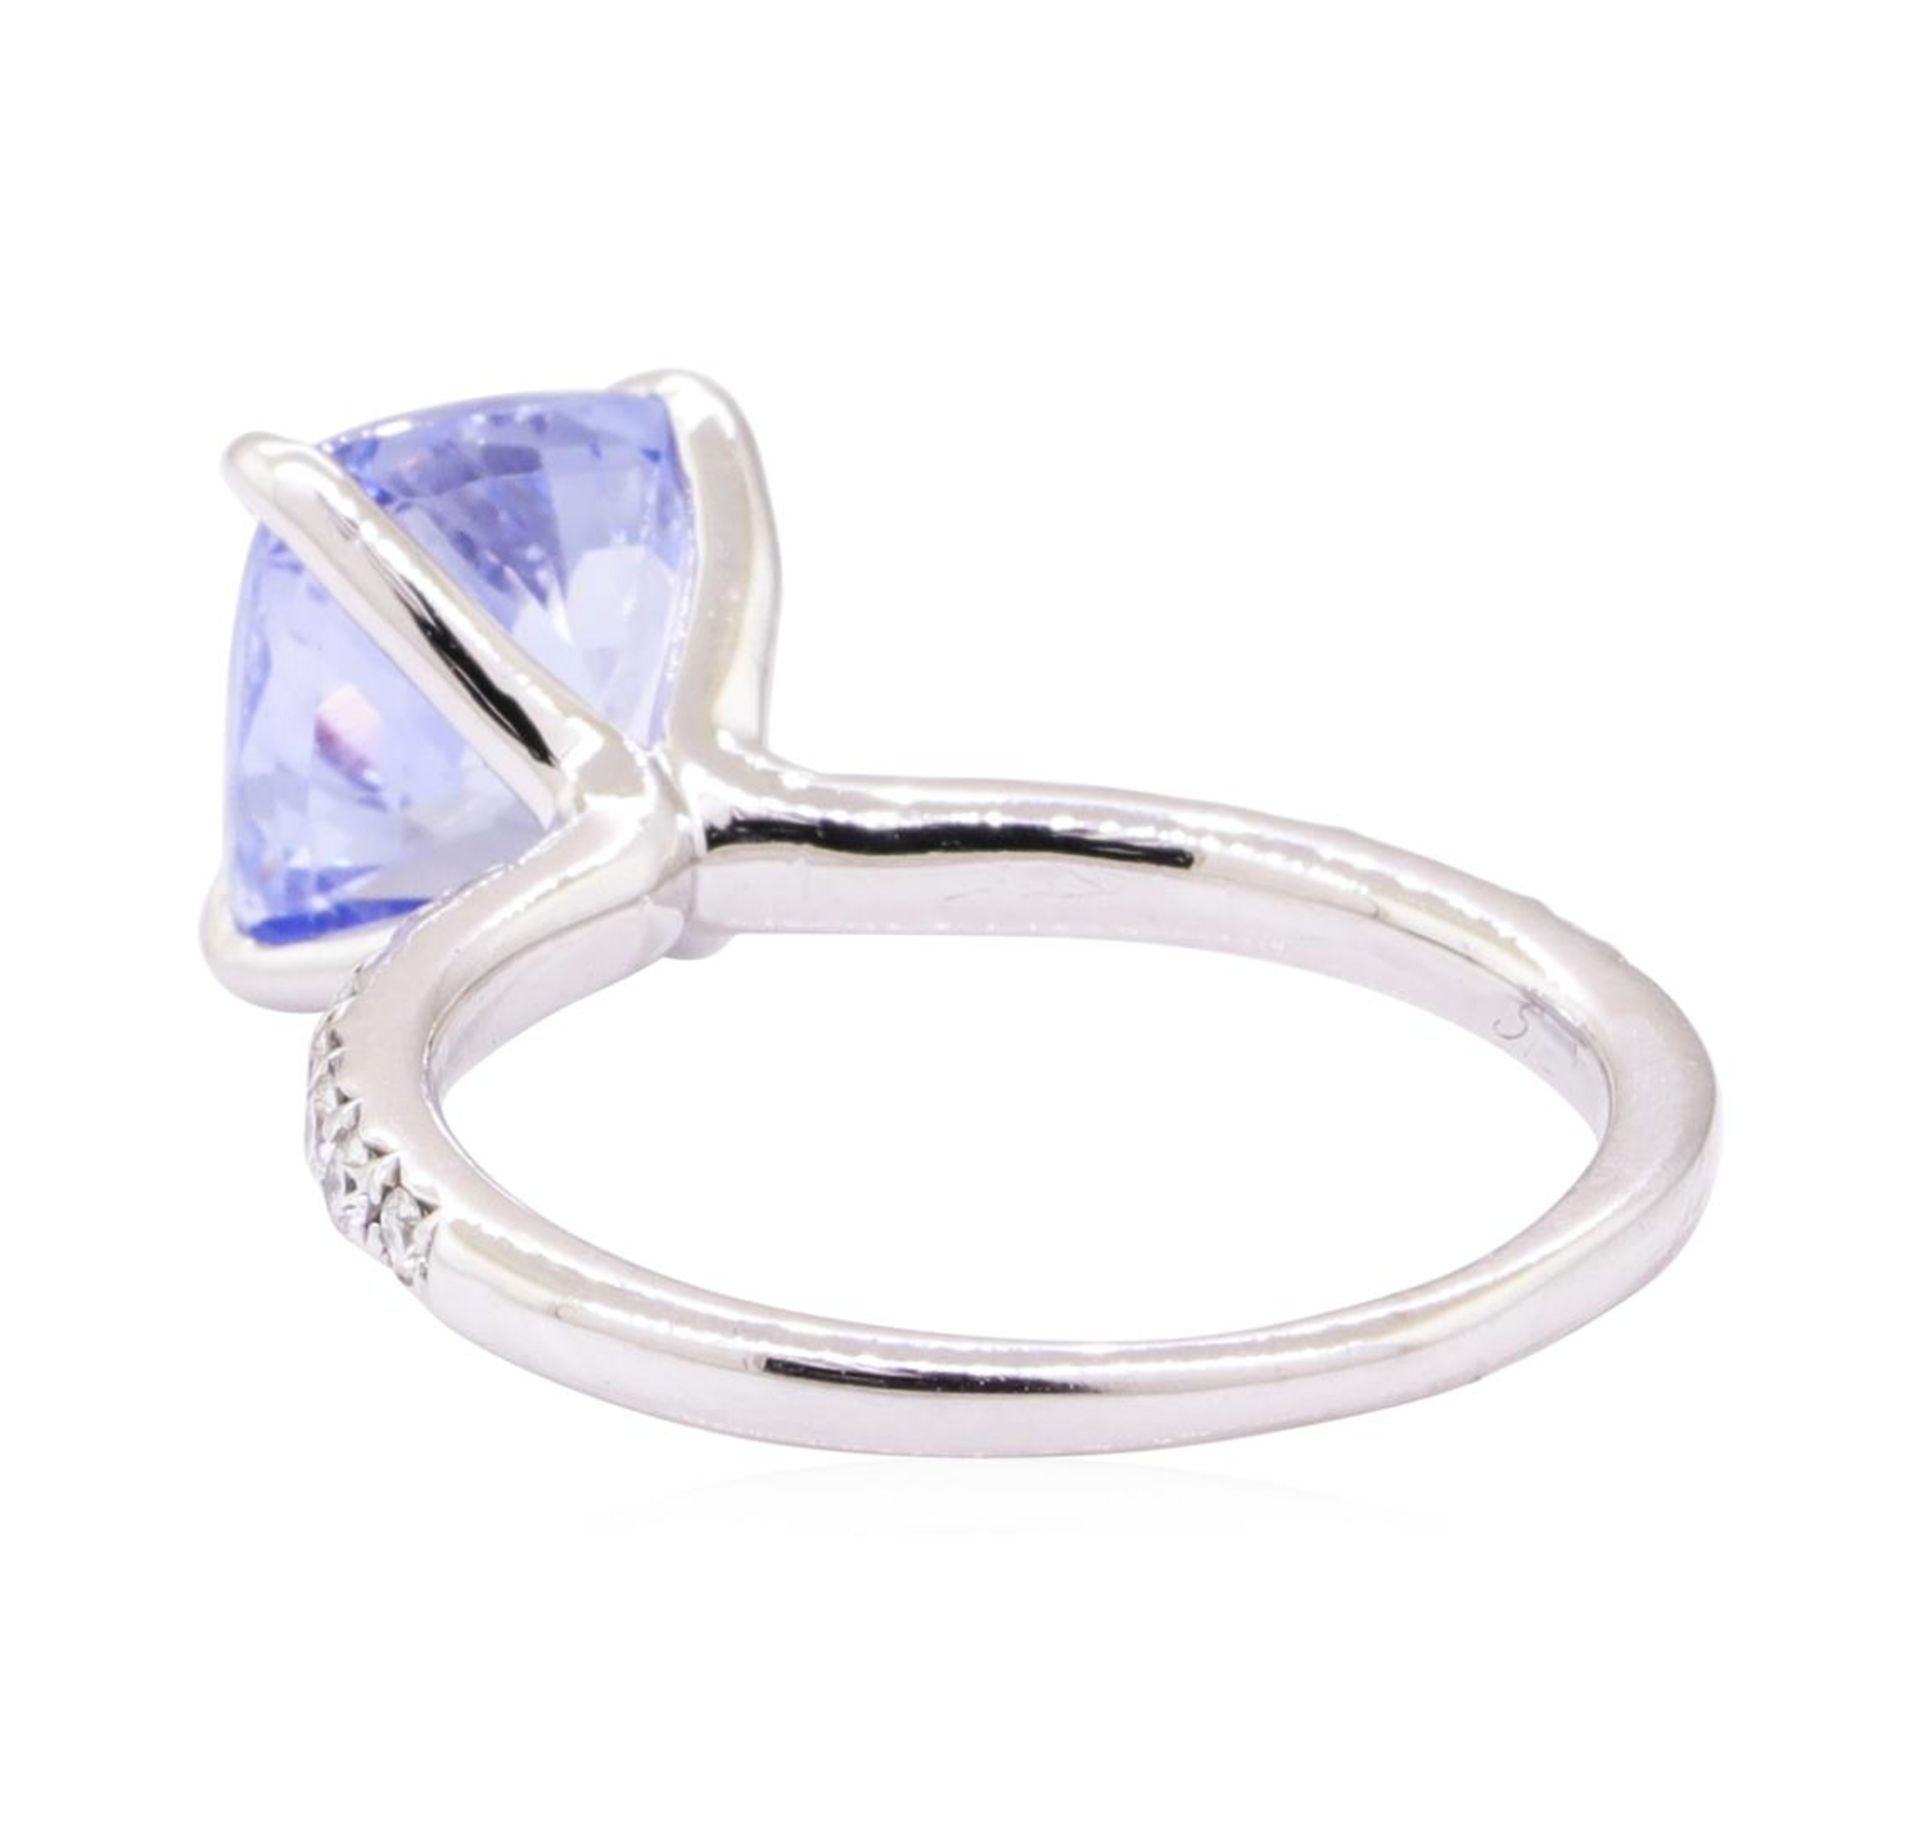 3.12ctw Blue Sapphire and Diamond Ring - 18KT White Gold - Image 3 of 4